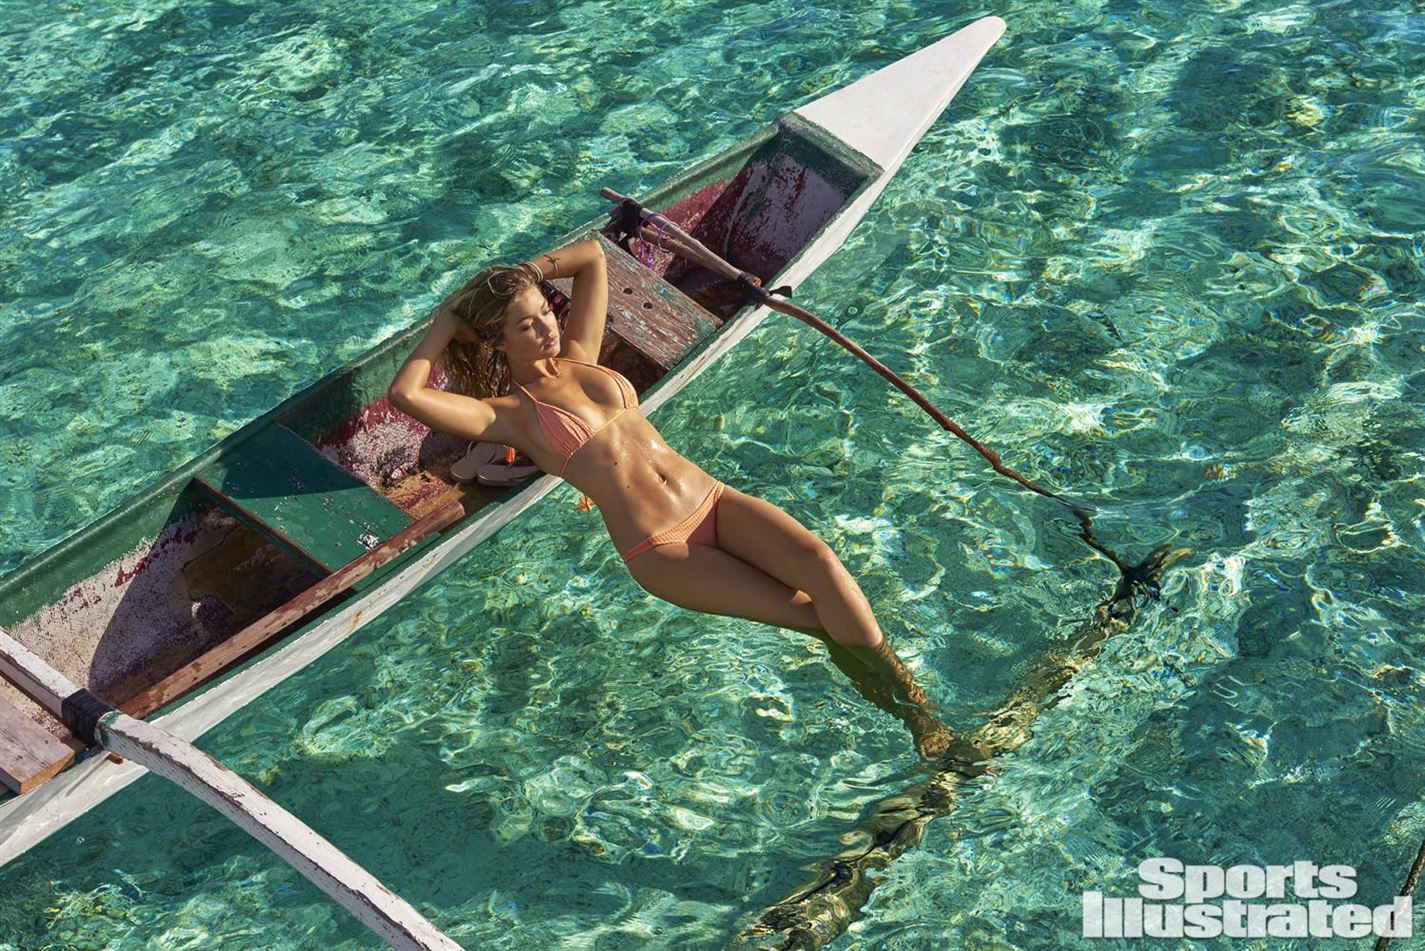 The Top 20 Hottest Women From The 2016 Sports Illustrated Swimsuit Issue Part 2